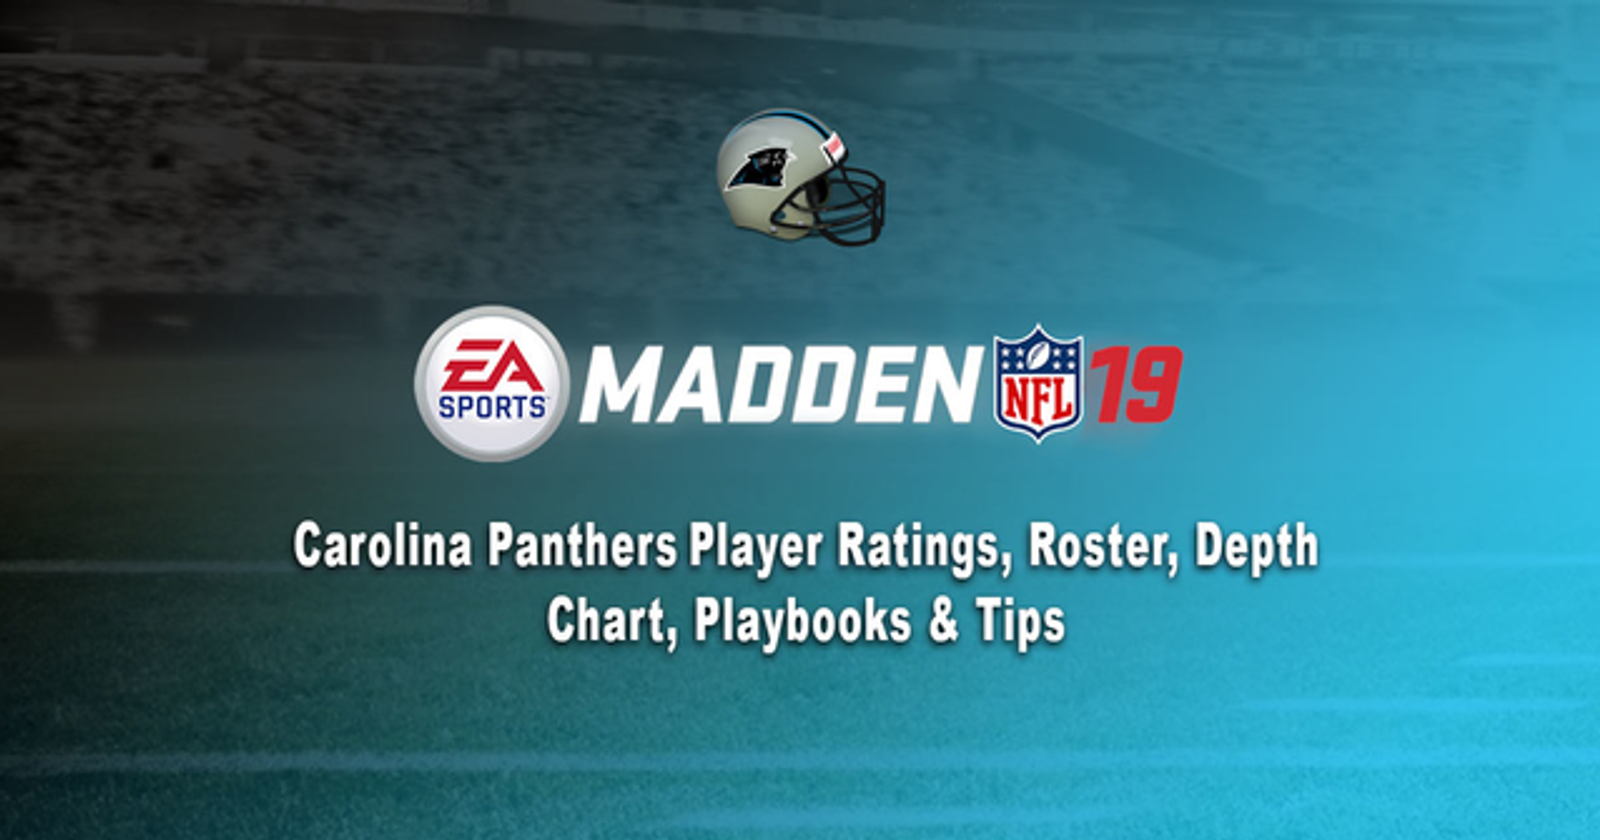 Madden 19: Carolina Panthers Player Ratings, Roster, Depth Chart & Playbooks